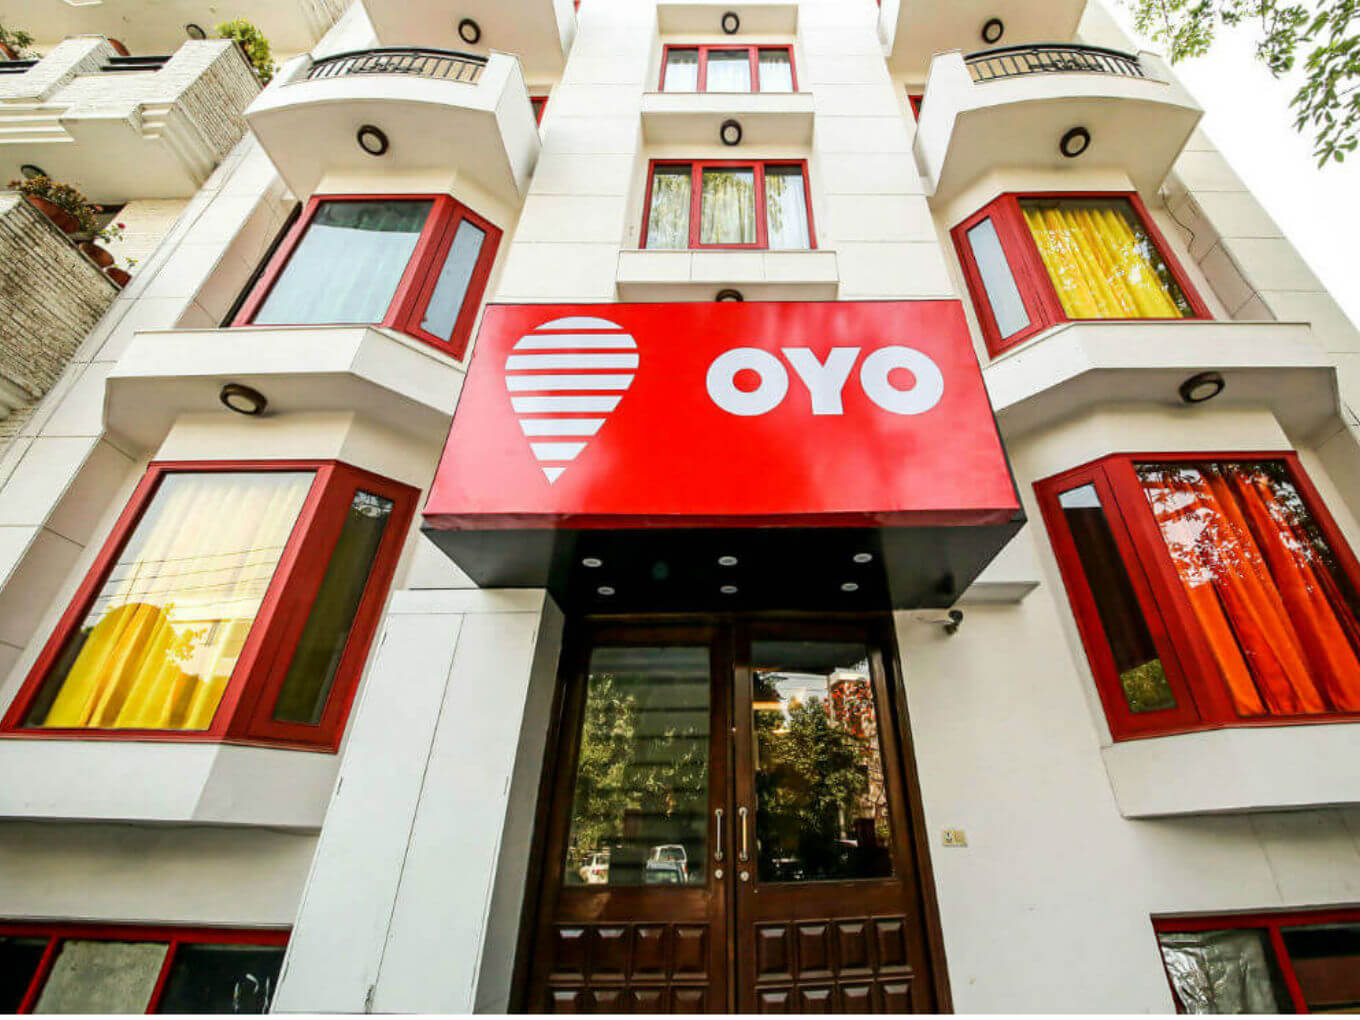 OYO Hotels Raises $1 Bn To Strengthen Market Leadership And Expand Global Footprints